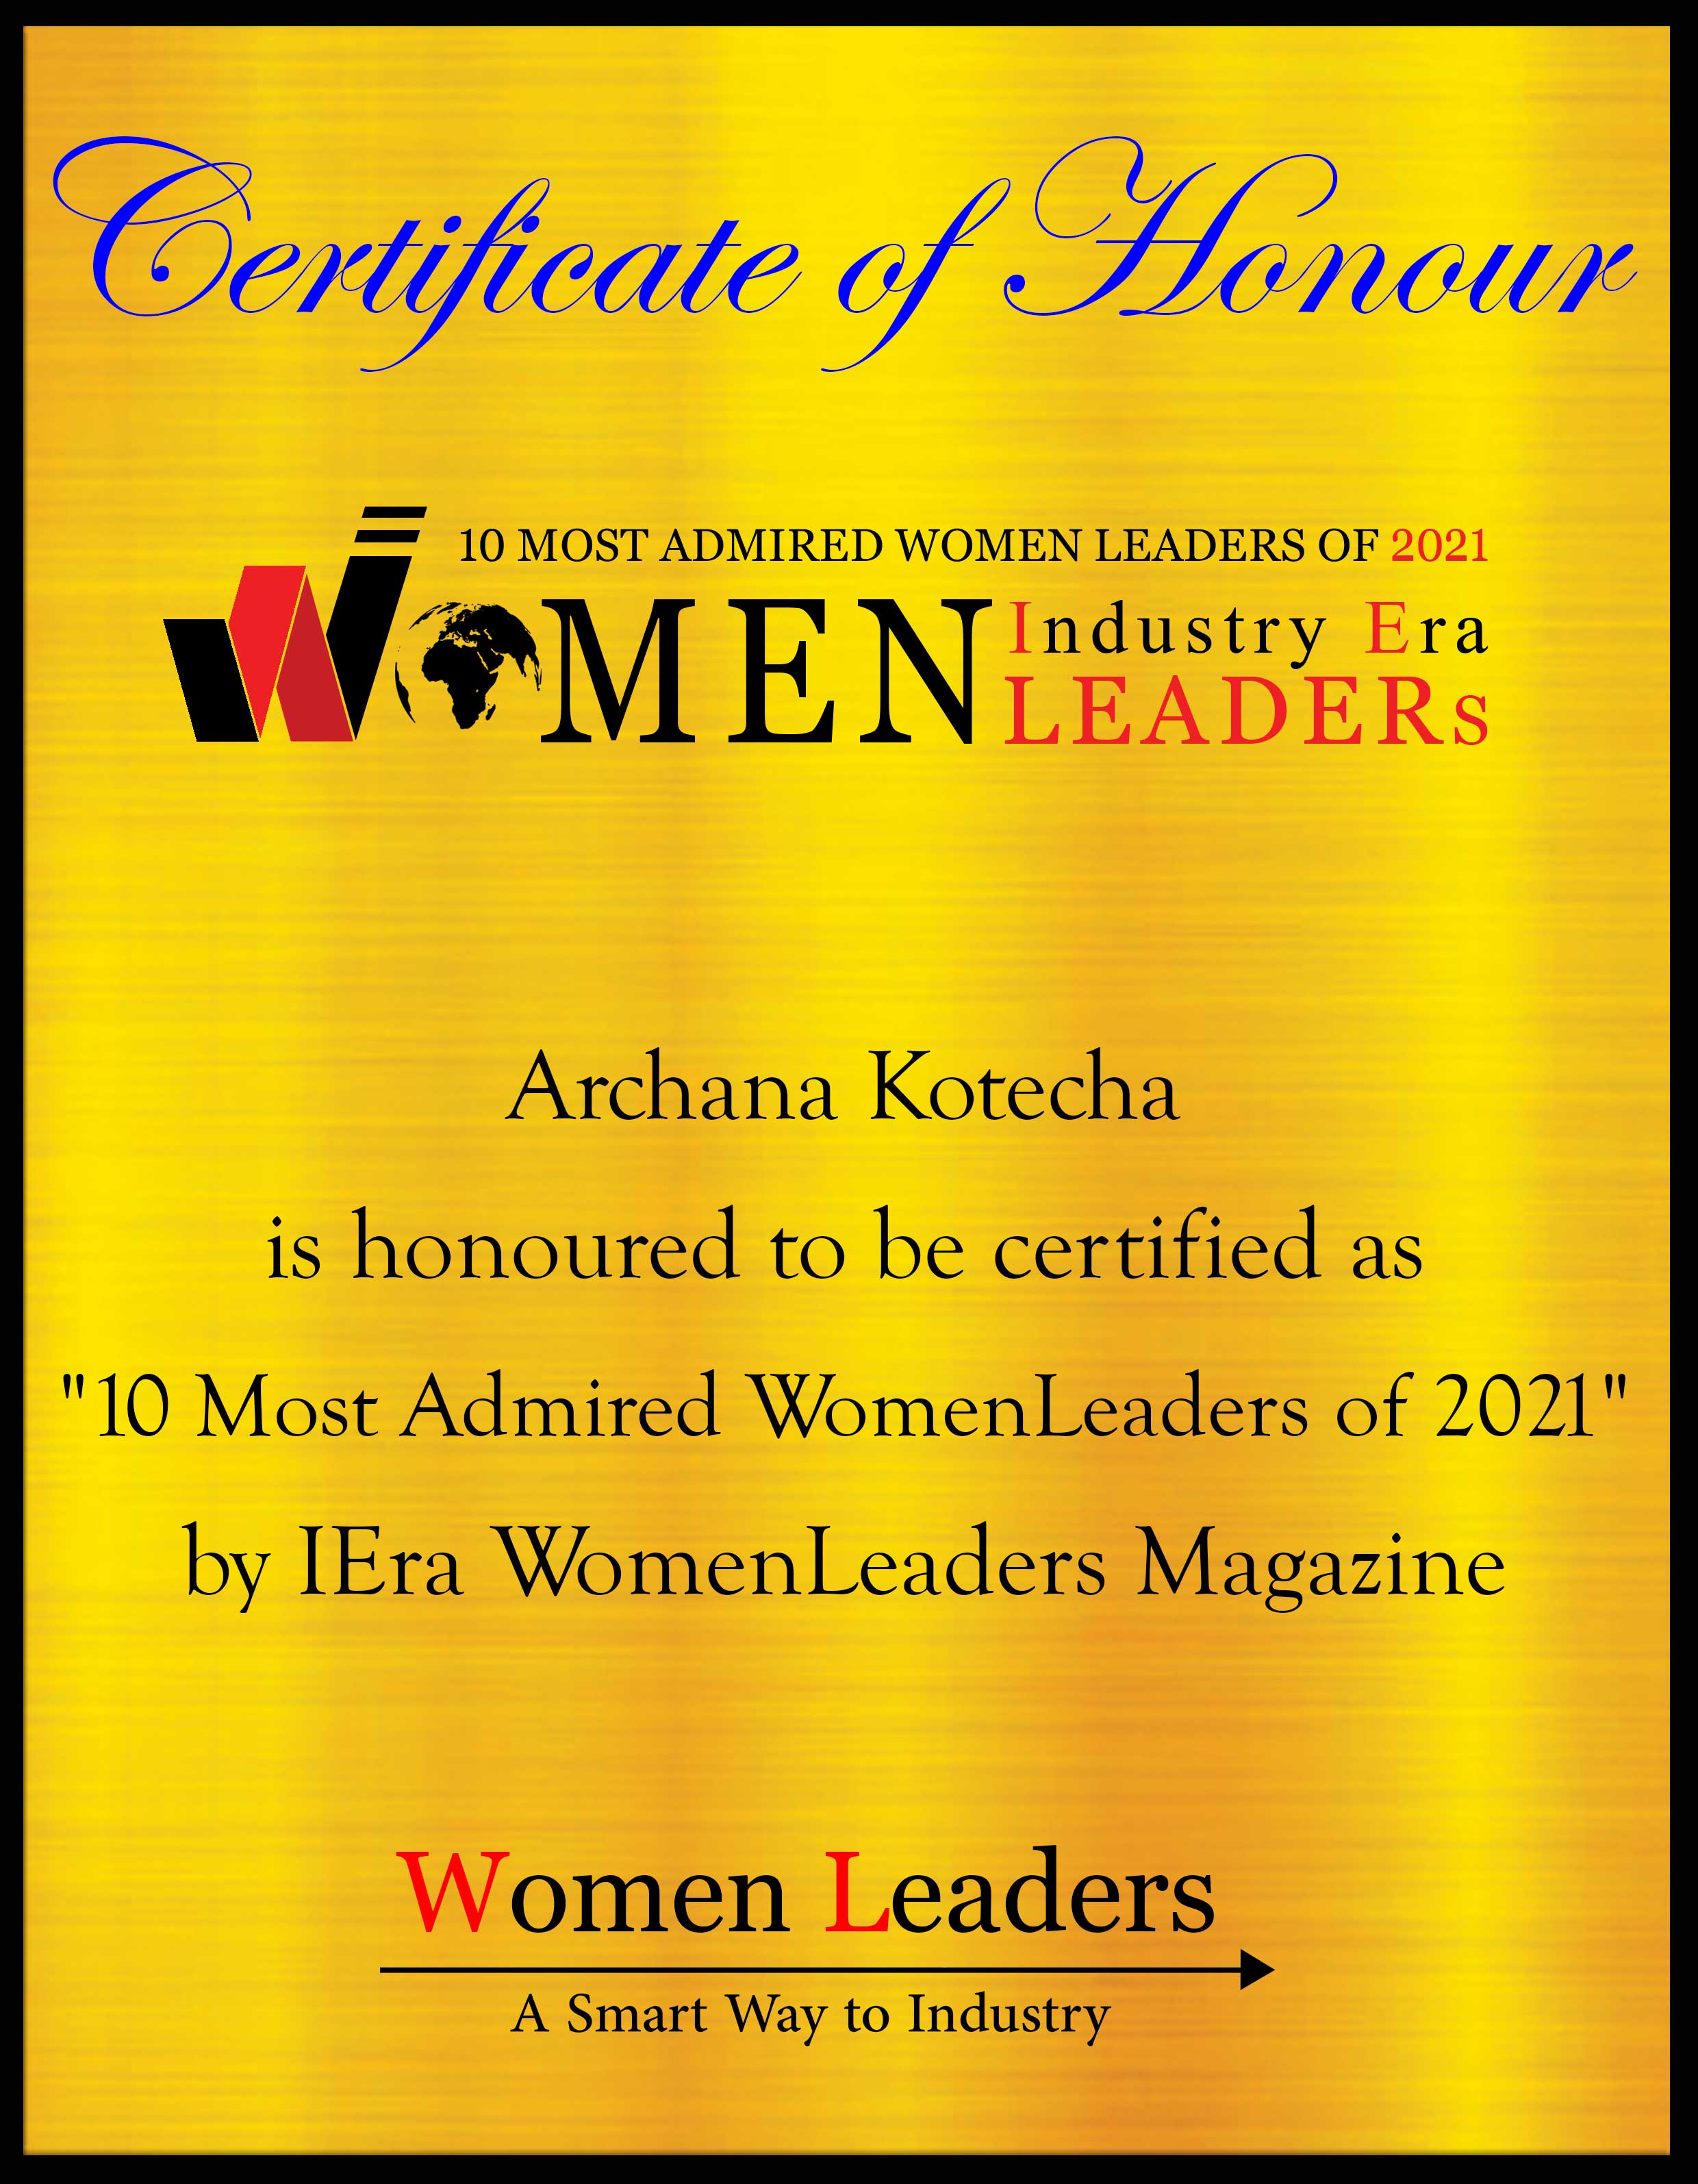 Archana Kotecha, CEO and Founder of The Remedy Project, Most Admired WomenLeaders of 2021